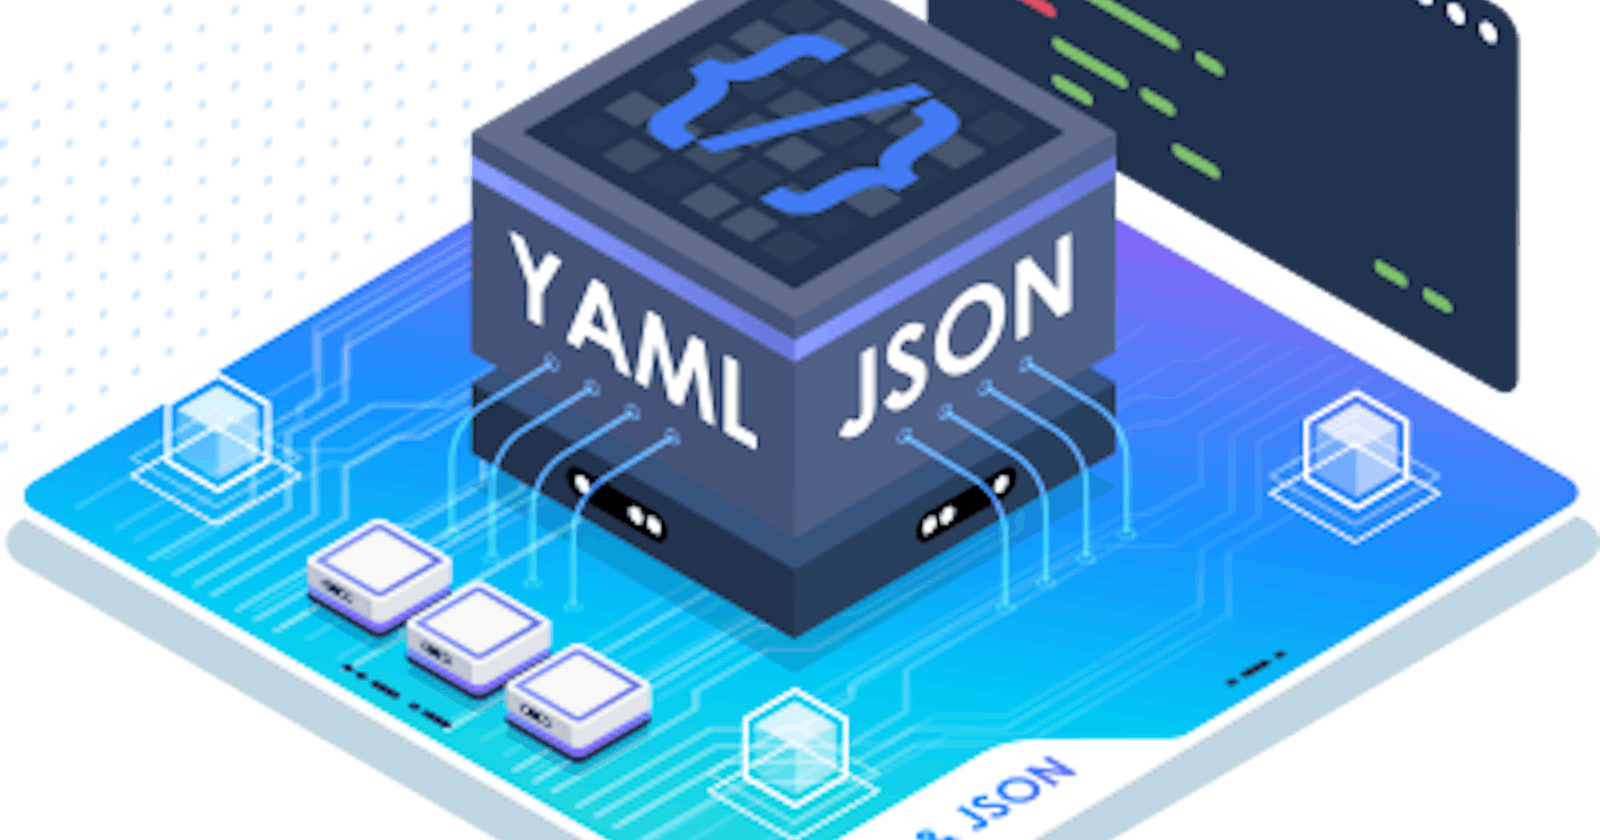 Introduction to YAML/JSON for configuration